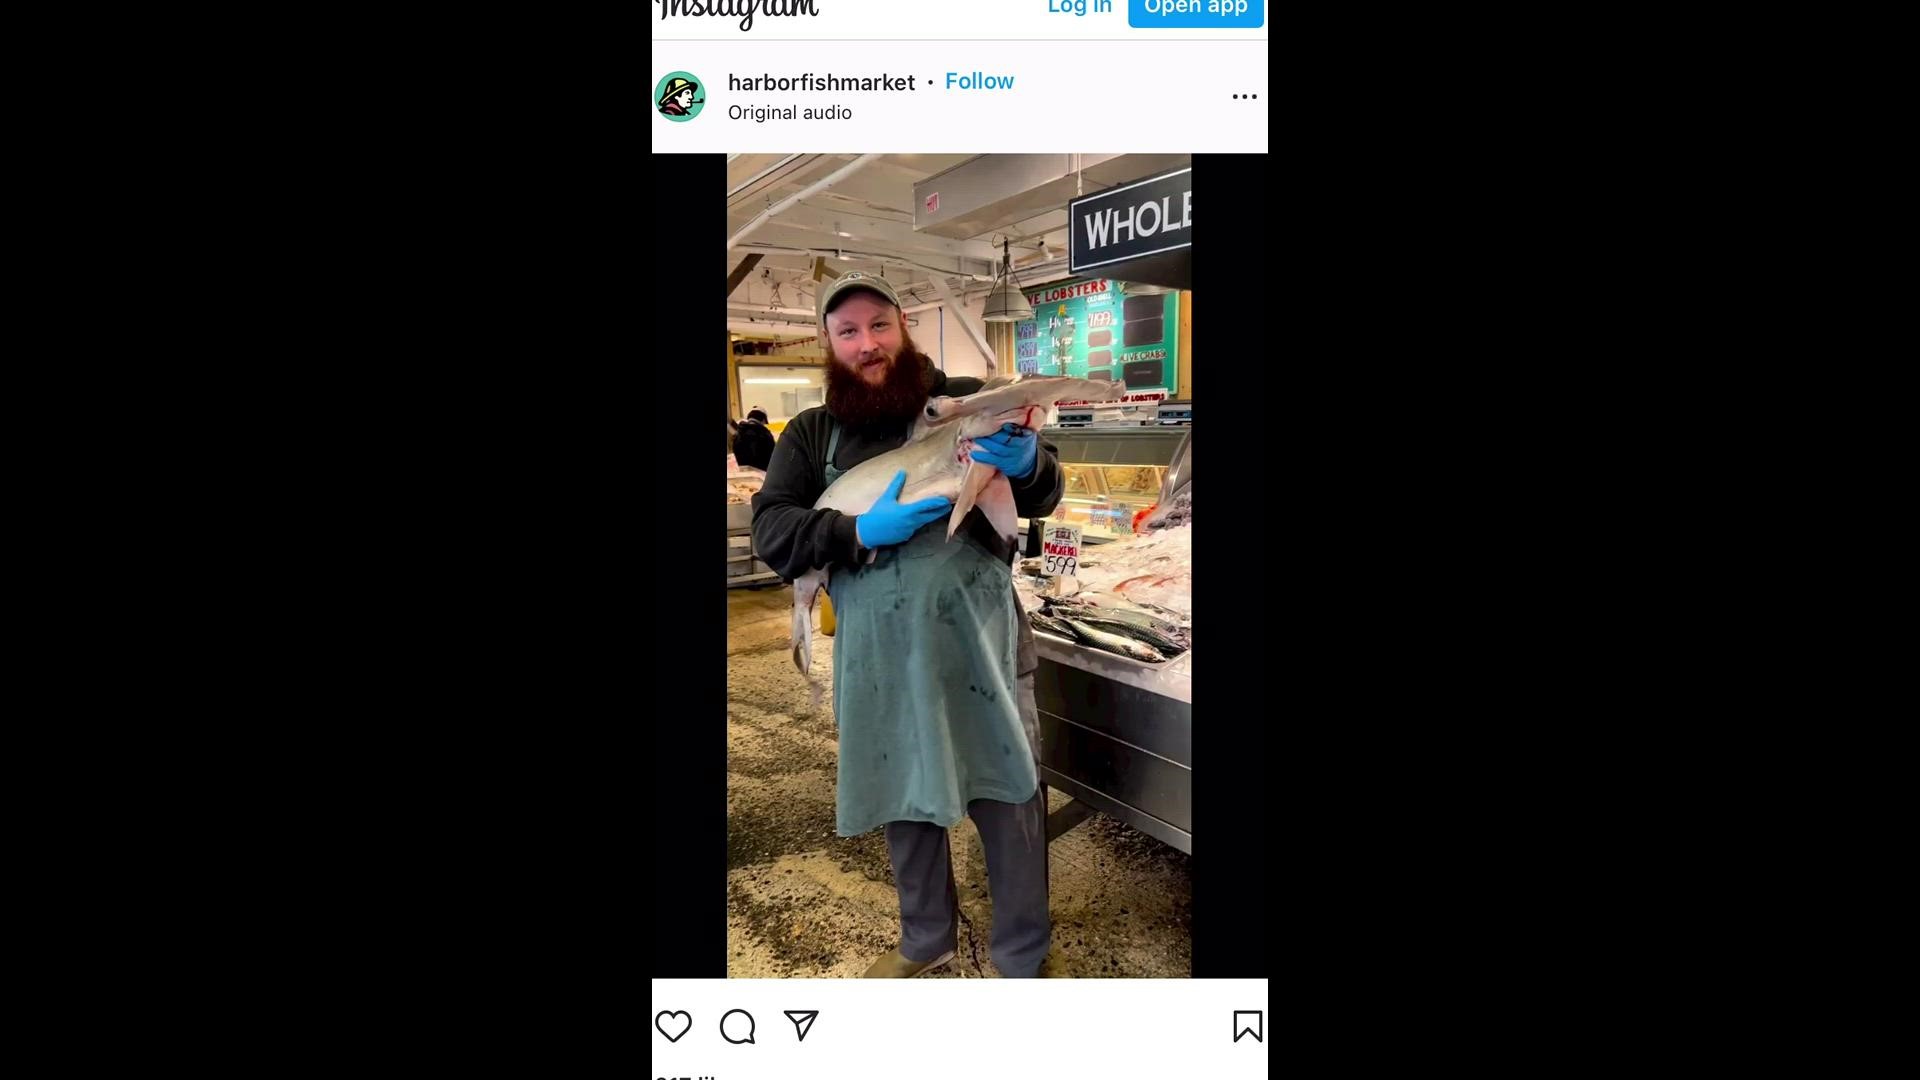 The video was posted this week on the Instagram account for Harbor Fish Market.